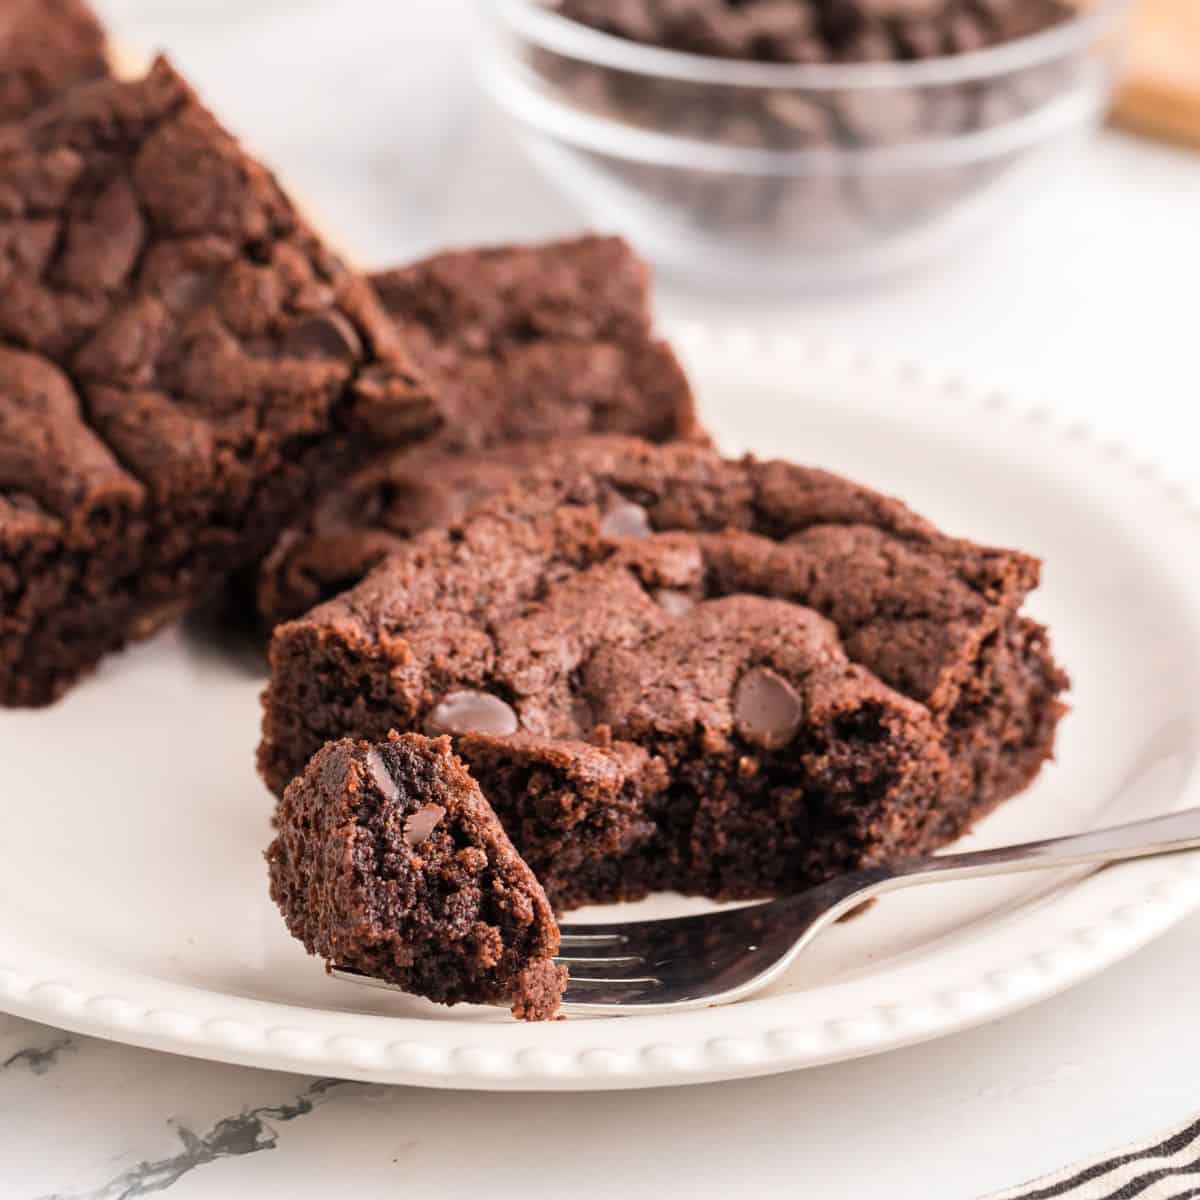 Sugar Free Cake Mix Brownies just 4 Ingredients. Easy and delicious fudgy brownie dessert or snack recipe. keto option.